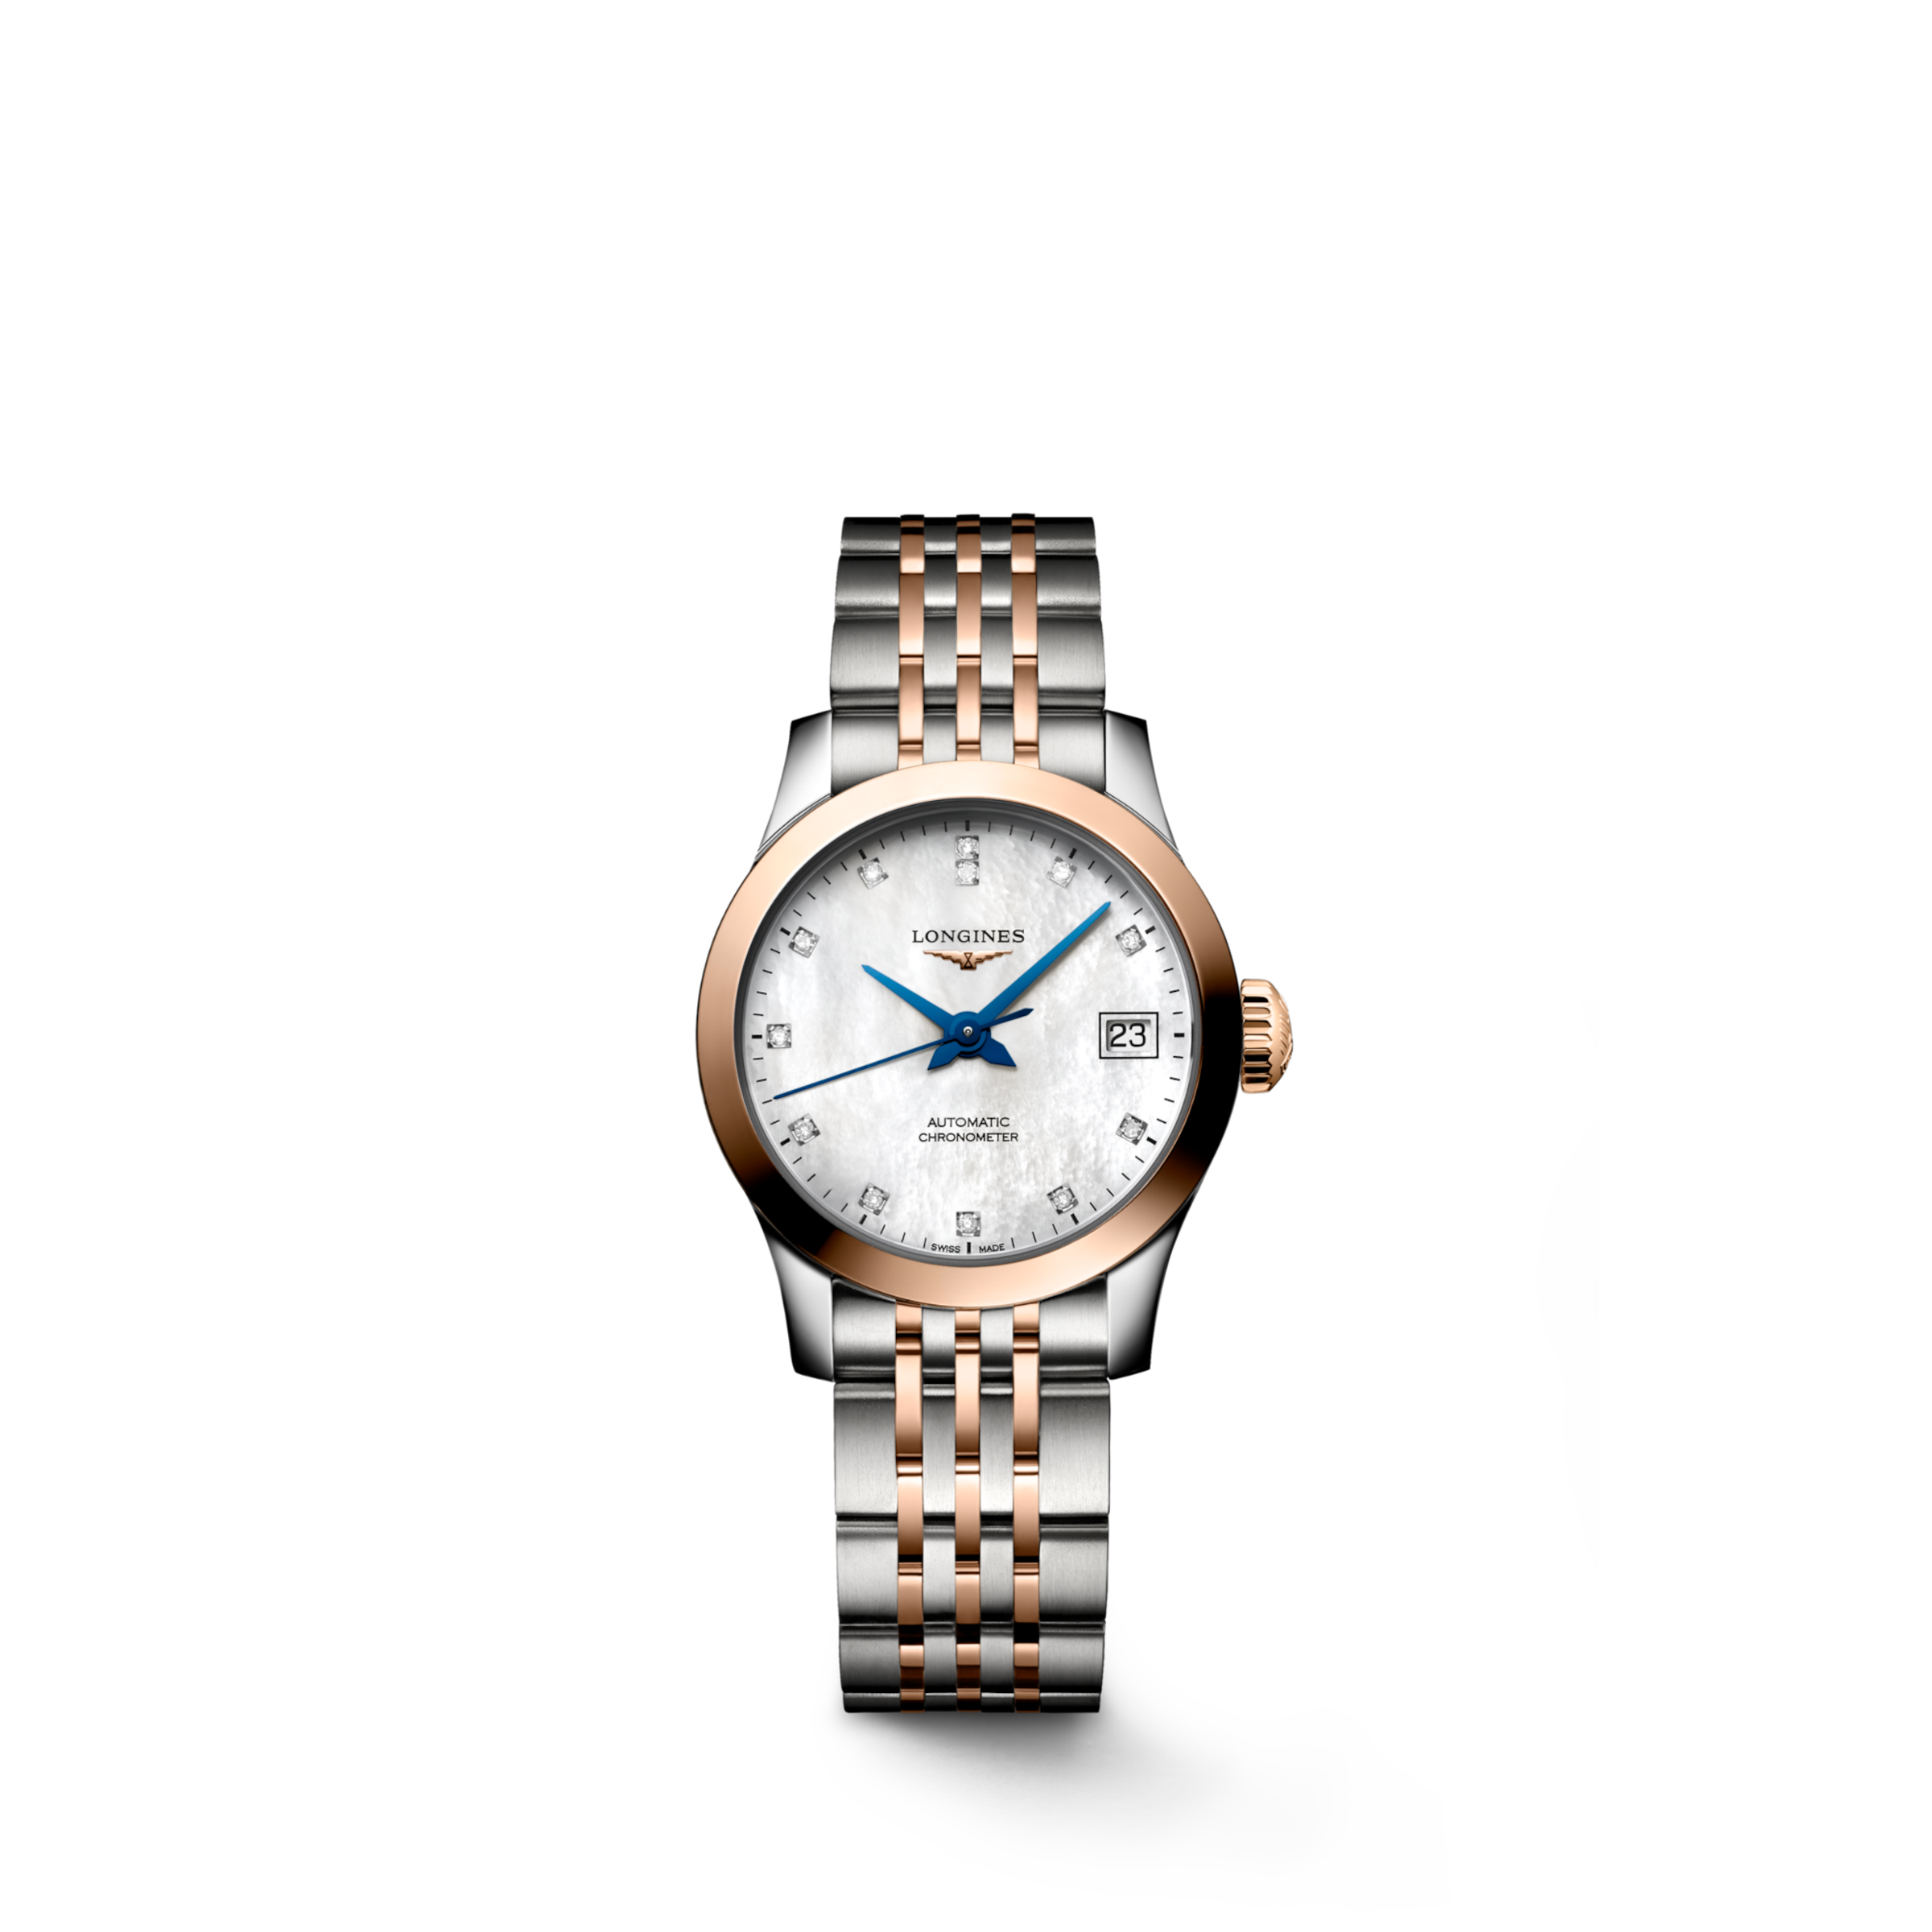 Longines RECORD Automatic Stainless steel and 18 karat pink gold cap 200 Watch - L2.320.5.87.7